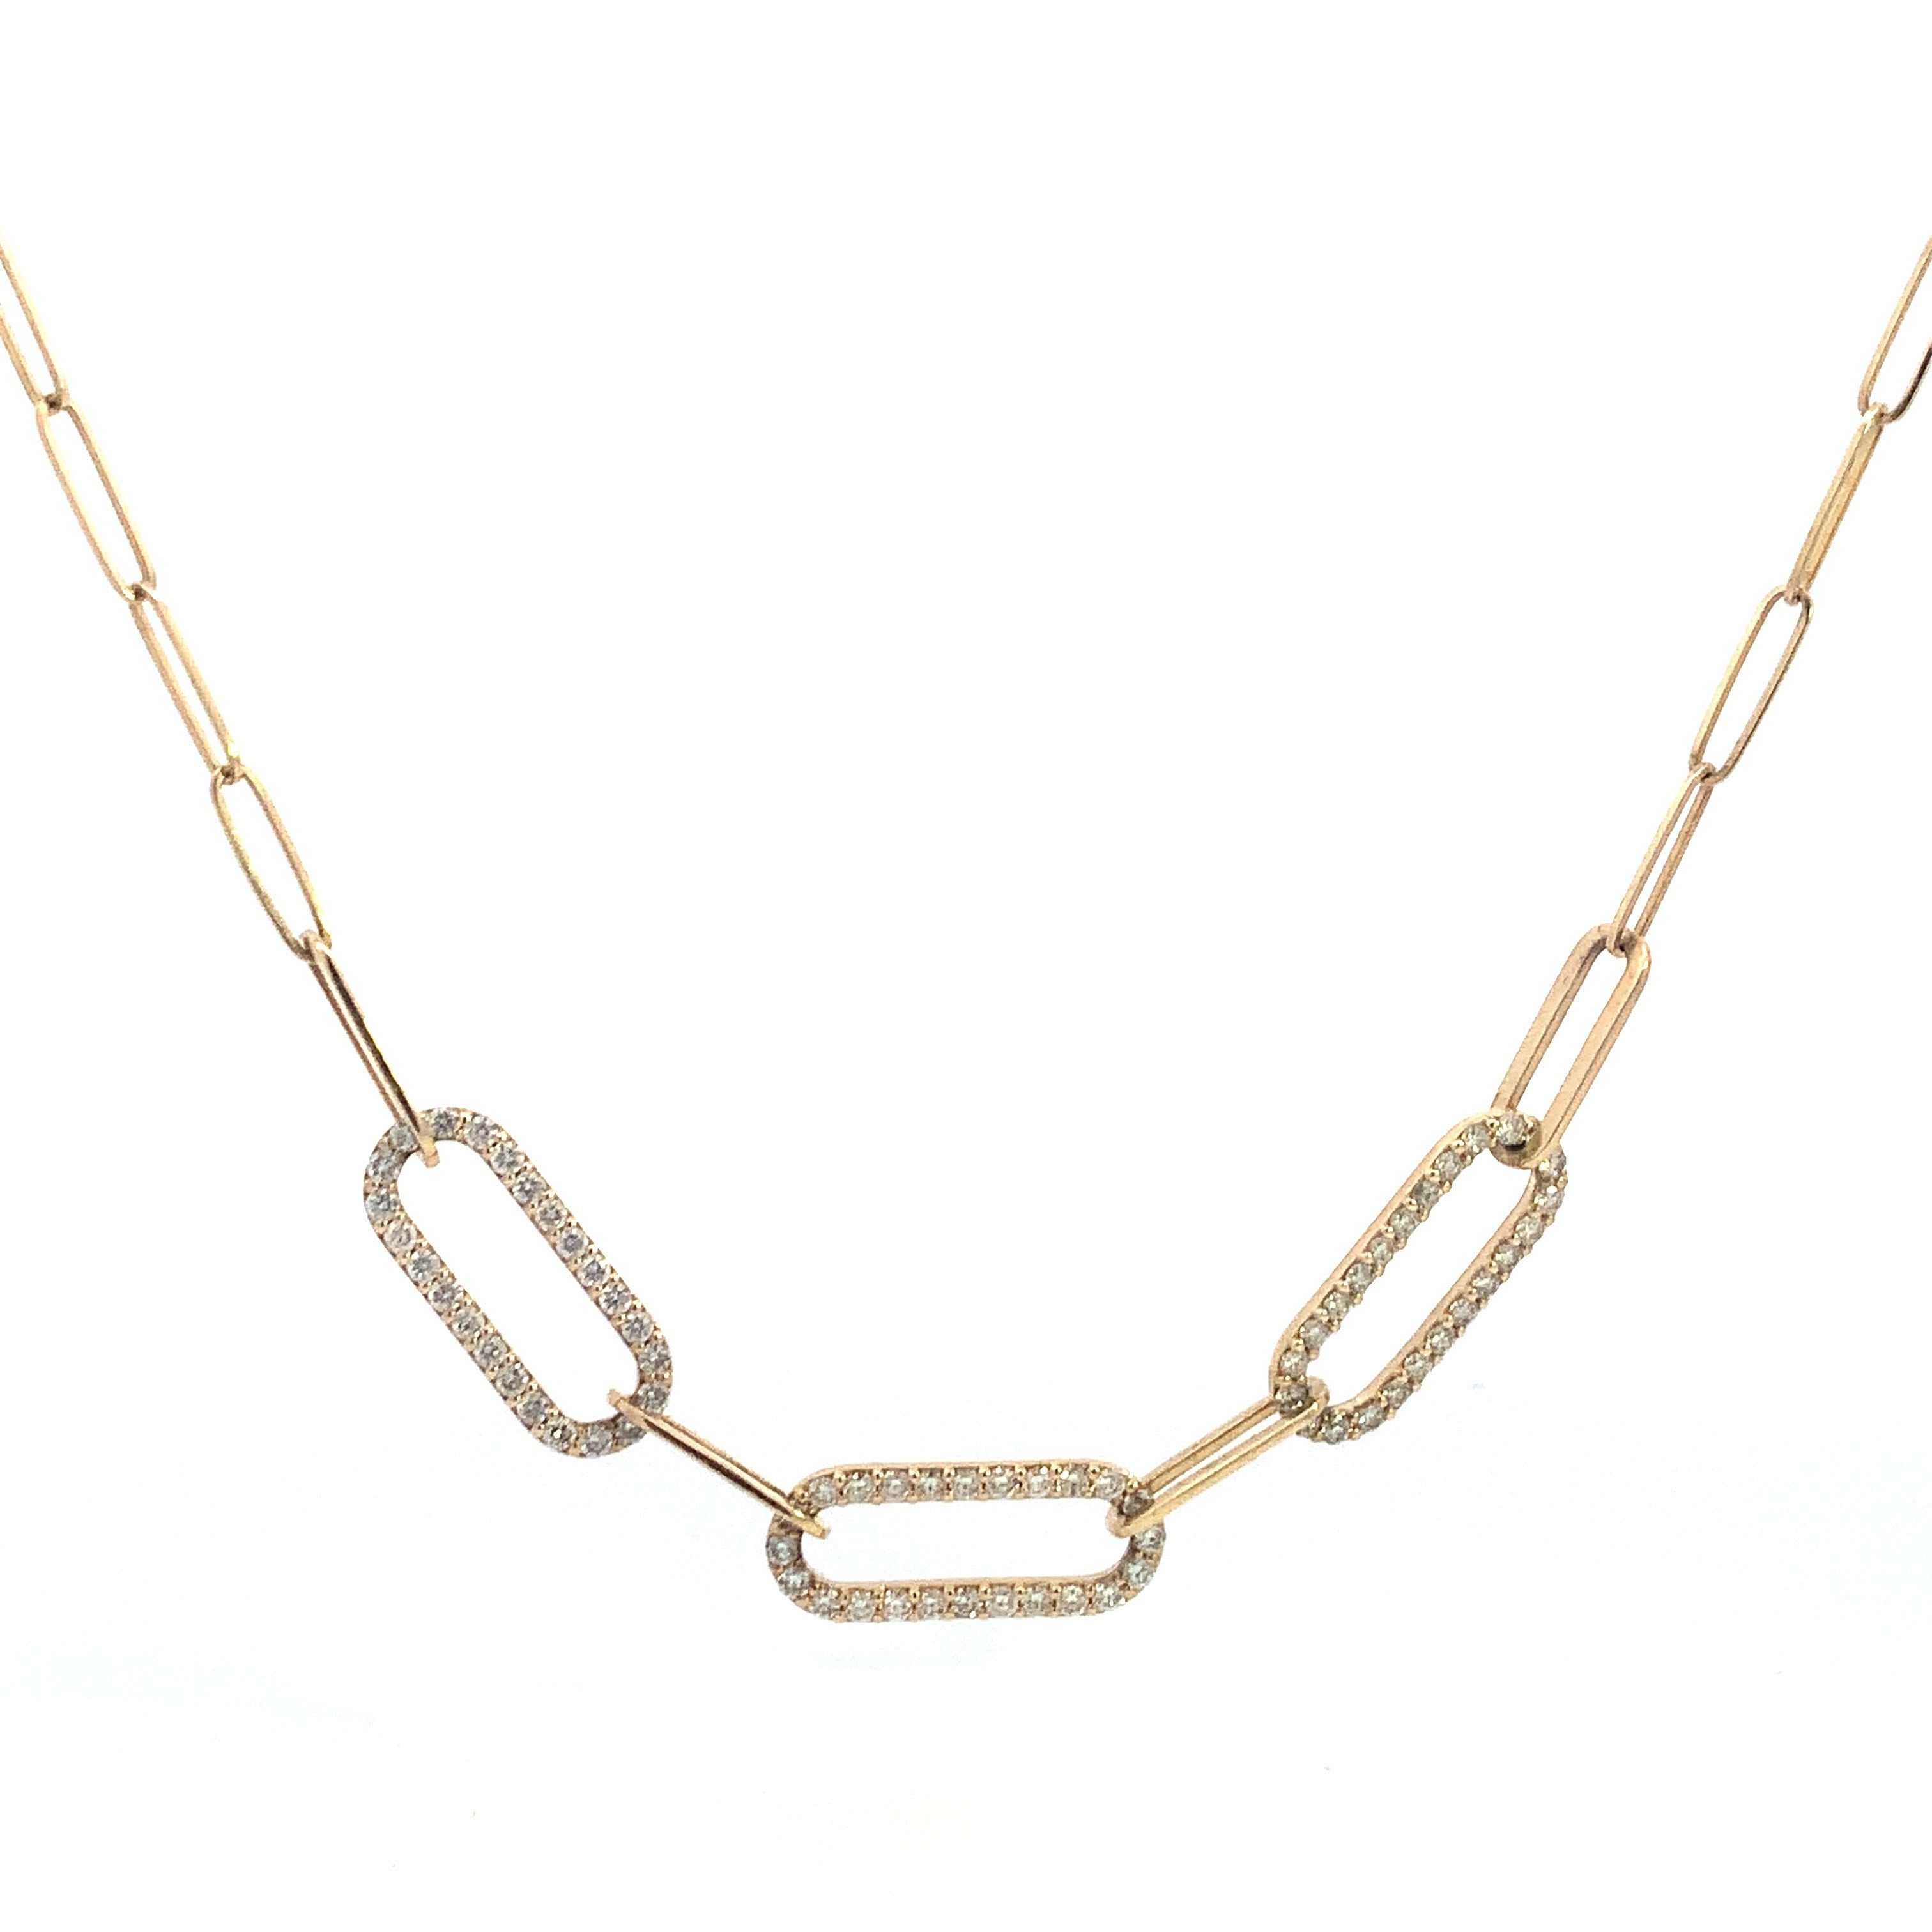 ALESSIA LARGE PAPERCLIP CHAIN NECKLACE - 18K YELLOW GOLD – lkleinjewelry